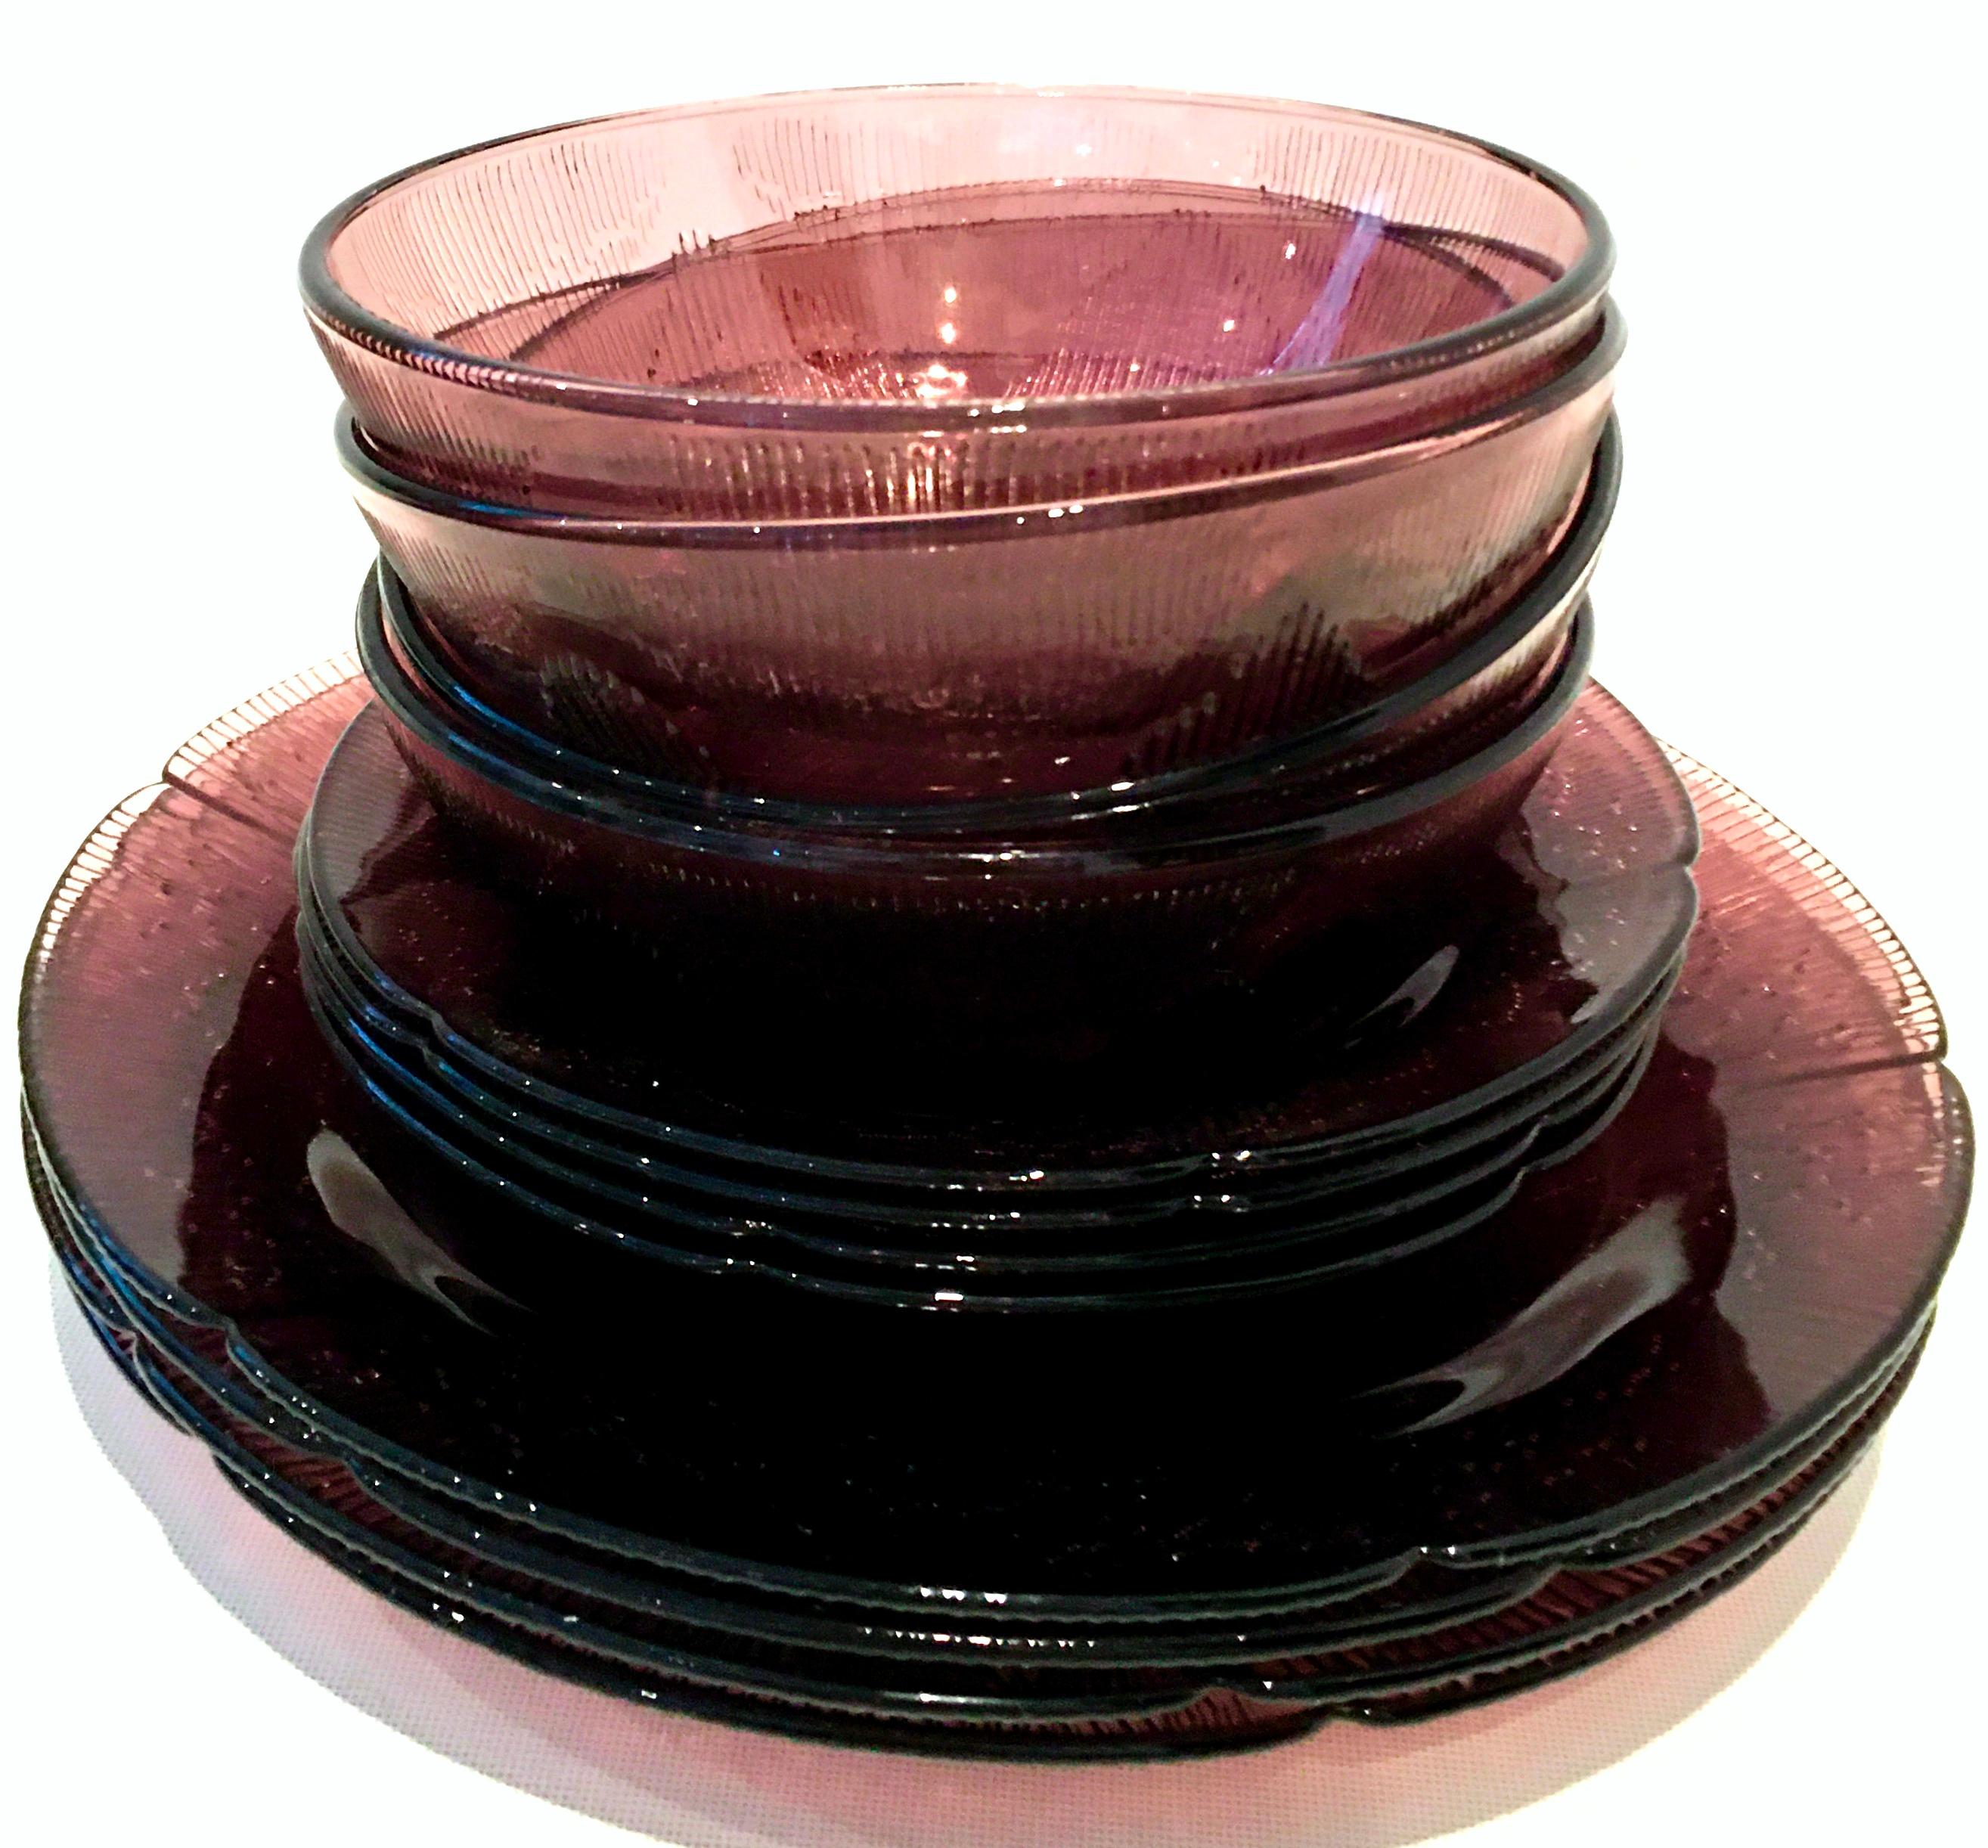 20th century American pressed glass amethyst dinnerware set of twelve pieces. This twelve piece amethyst dinnerware set features a textured and big print floral pattern on the underside of each piece. Set includes four of each, dinner plate, soup